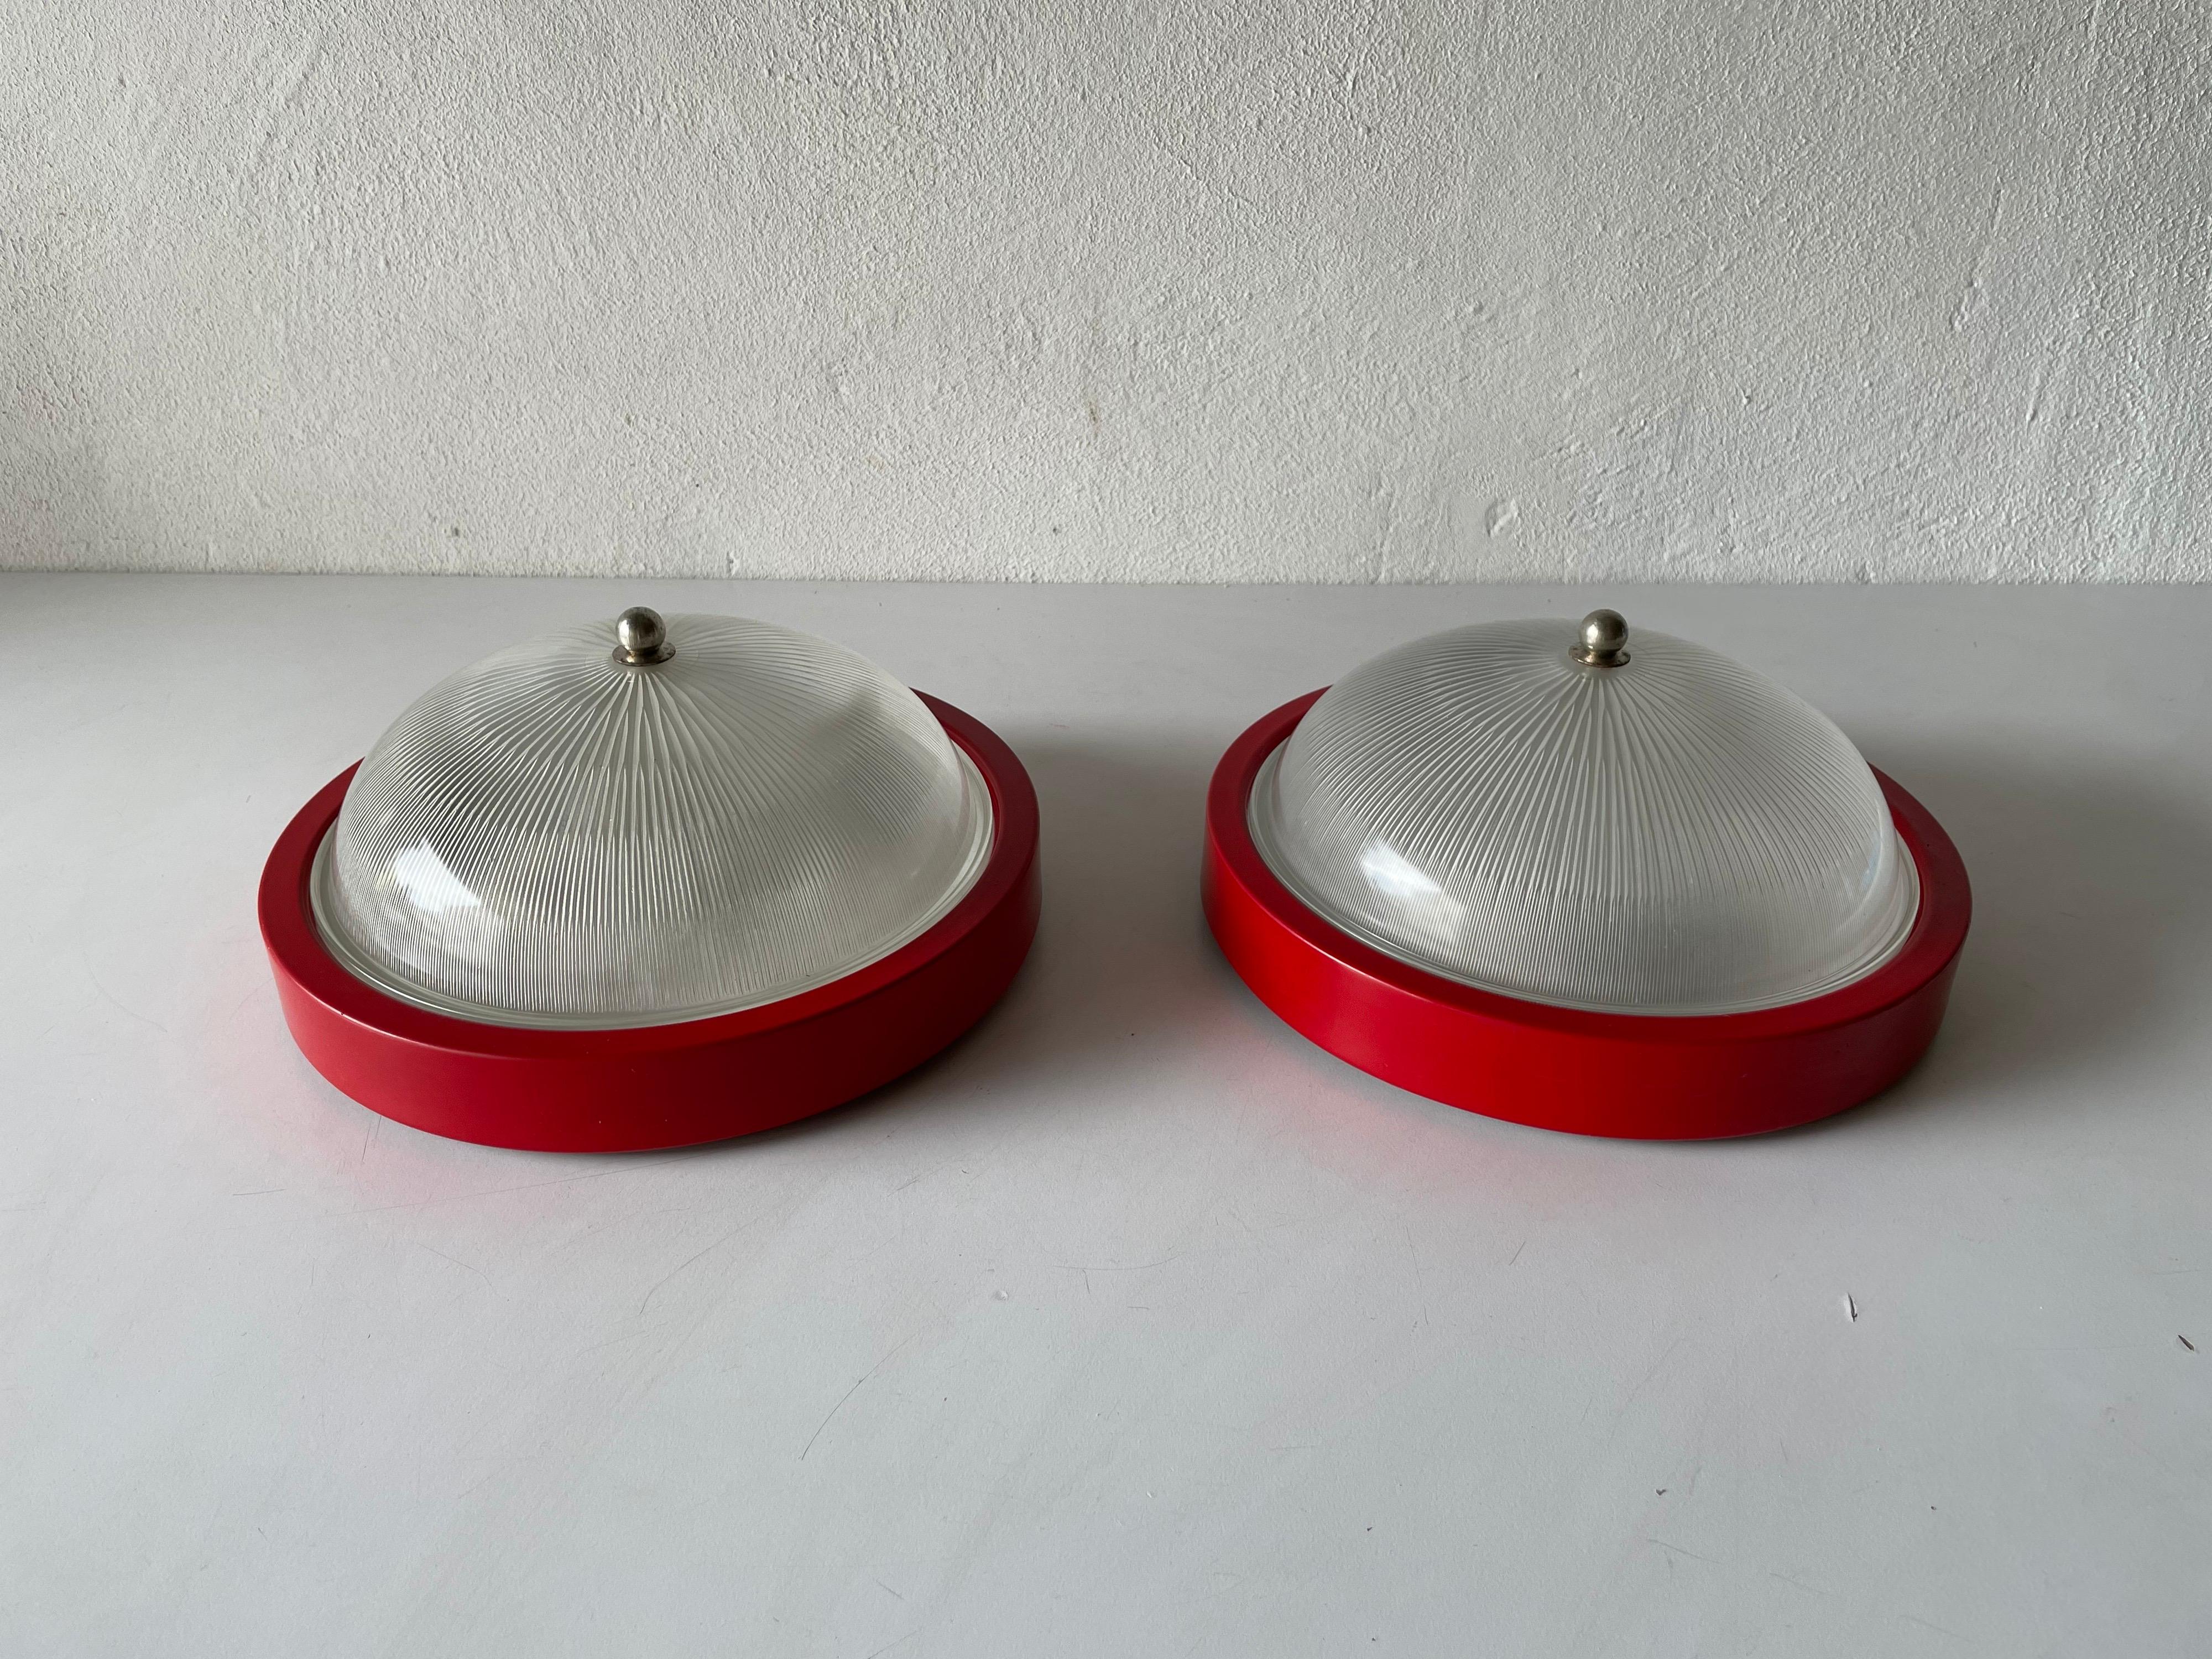 Glass red metal base pair of sconces or ceiling lamps by Reggiani, 1970s, Italy

Minimalist high quality design

Lamps are in very good vintage condition.
Wear consistent with age and use

These lamp works with 2x E14 standard light bulb. Max